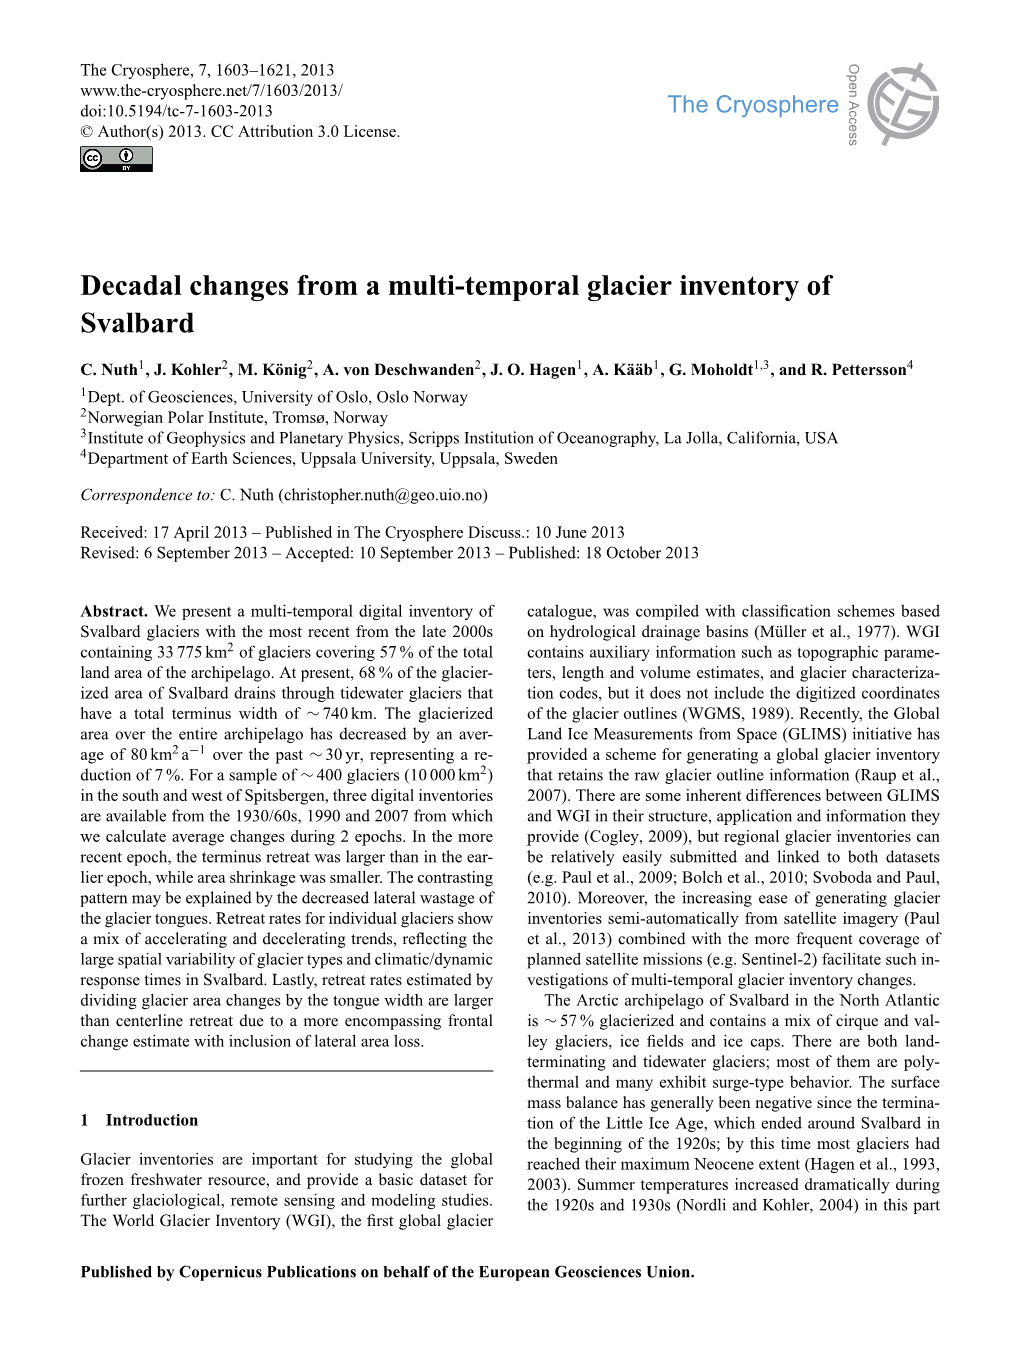 Decadal Changes from a Multi-Temporal Glacier Inventory of Svalbard